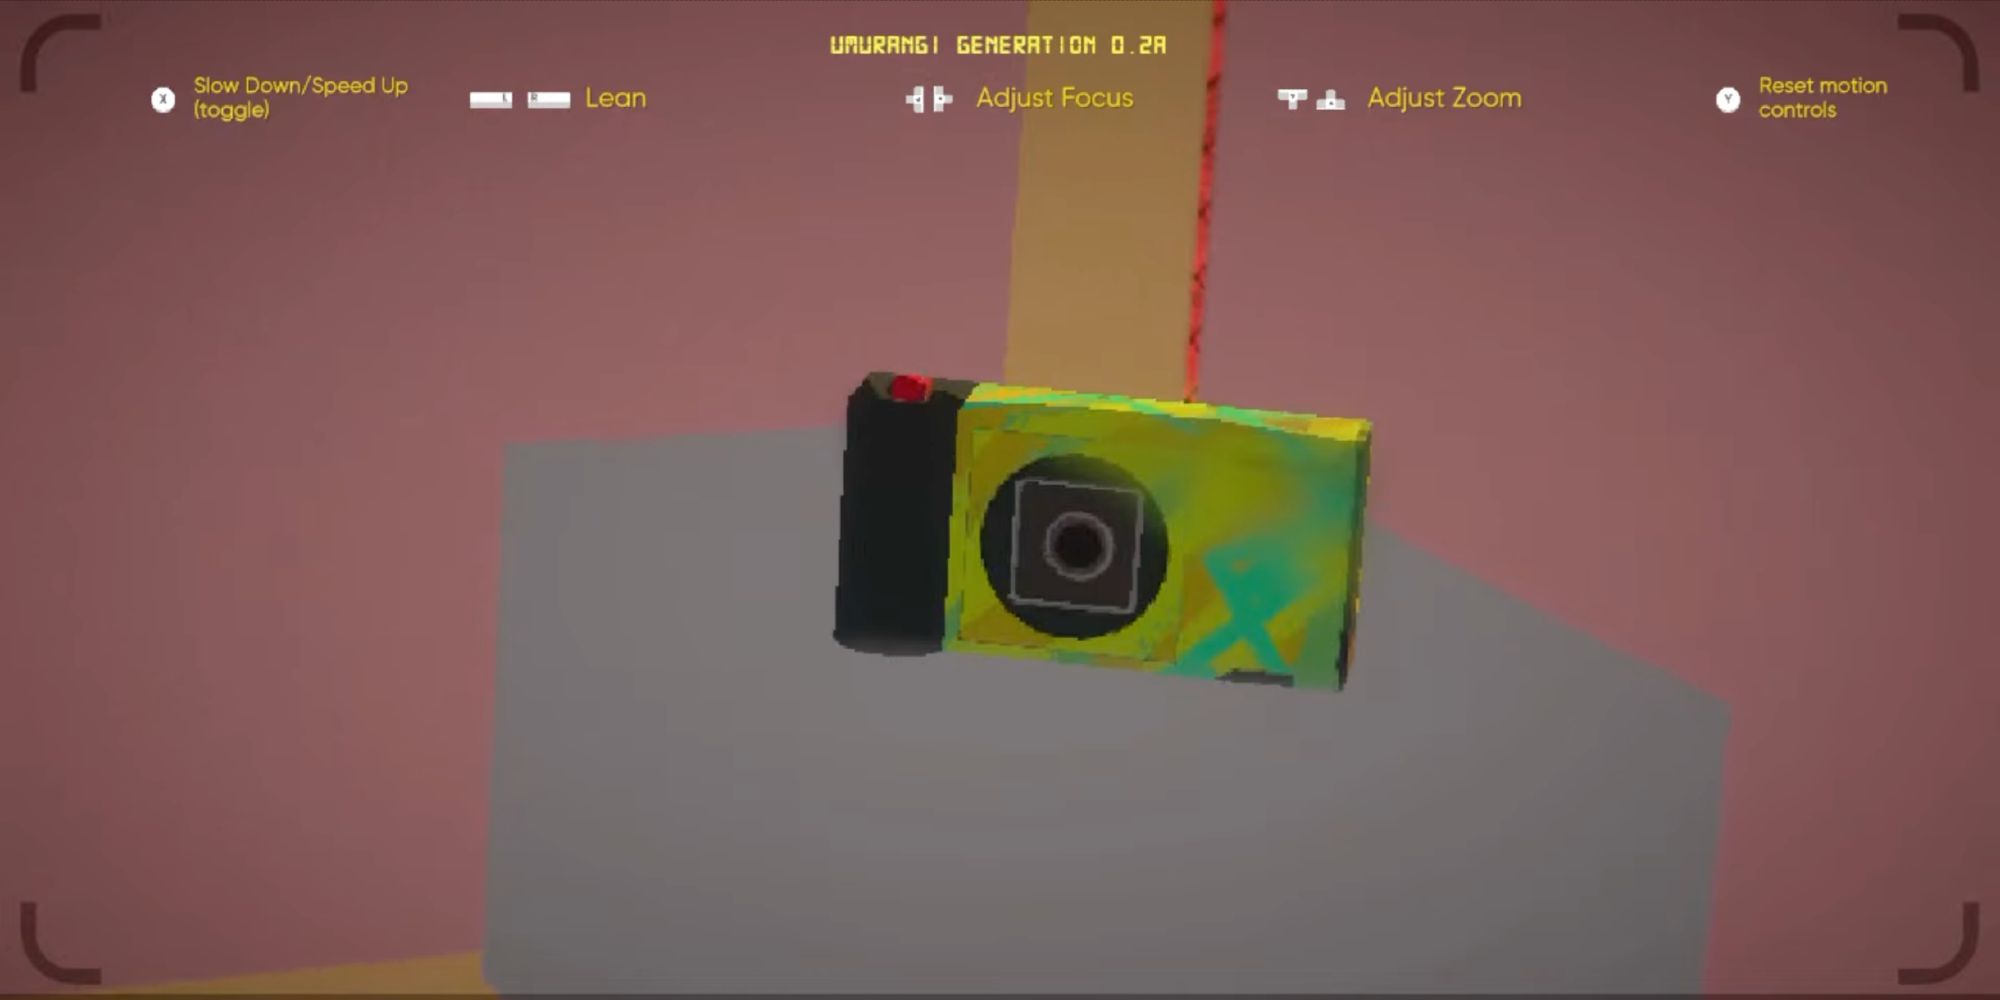 A player aims their lens at a disposable camera in Umurangi Generation